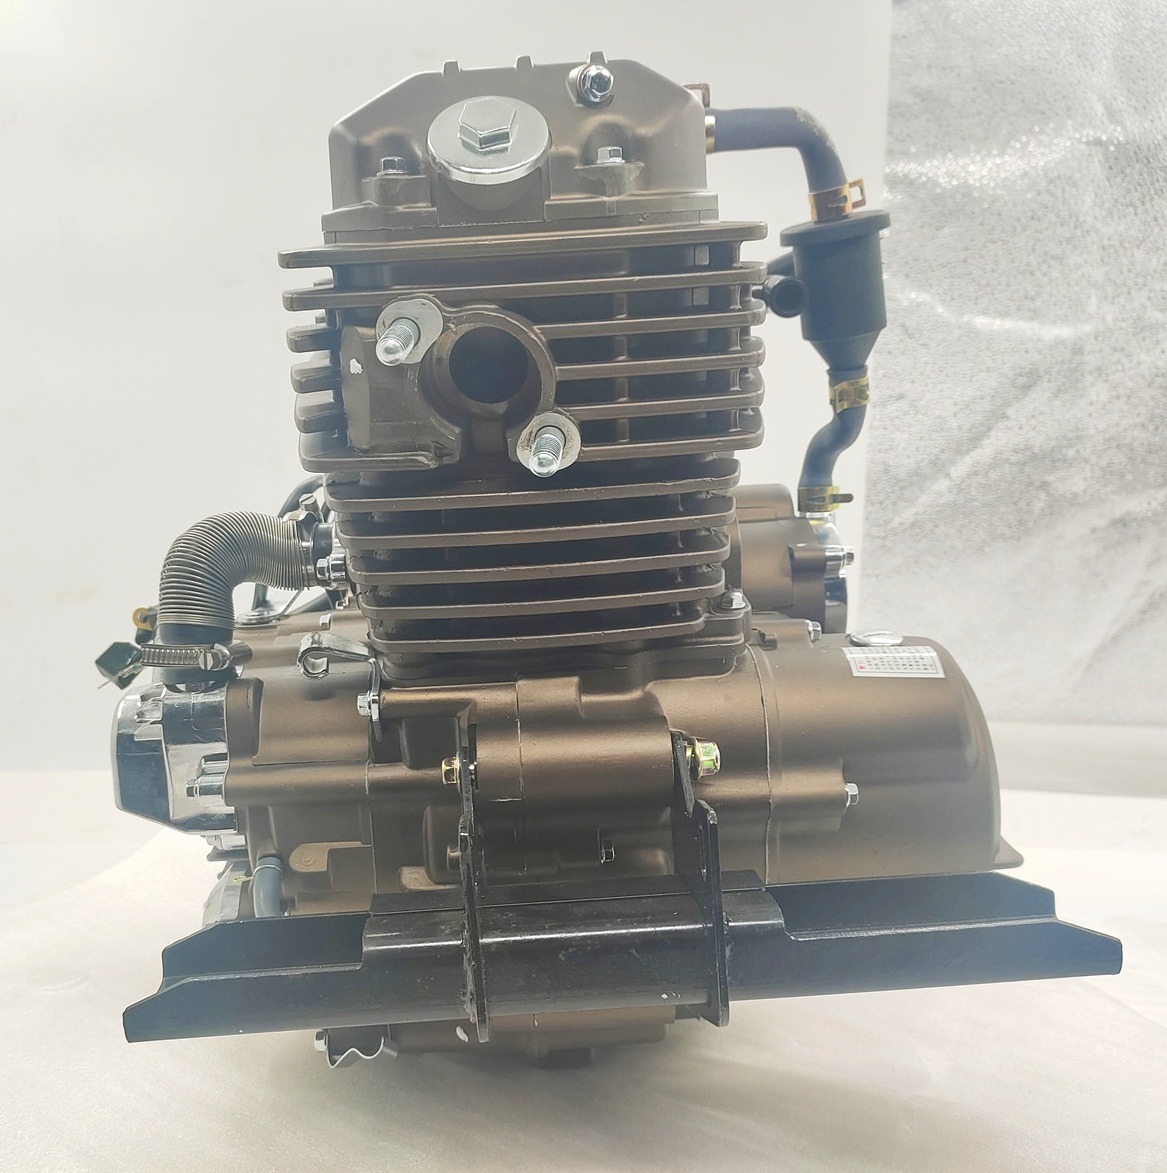 DAYANG LIFAN 320cc Motorcycle engine Assembly Single Cylinder Four Stroke Style China Origin Quality Tricycle parts engine